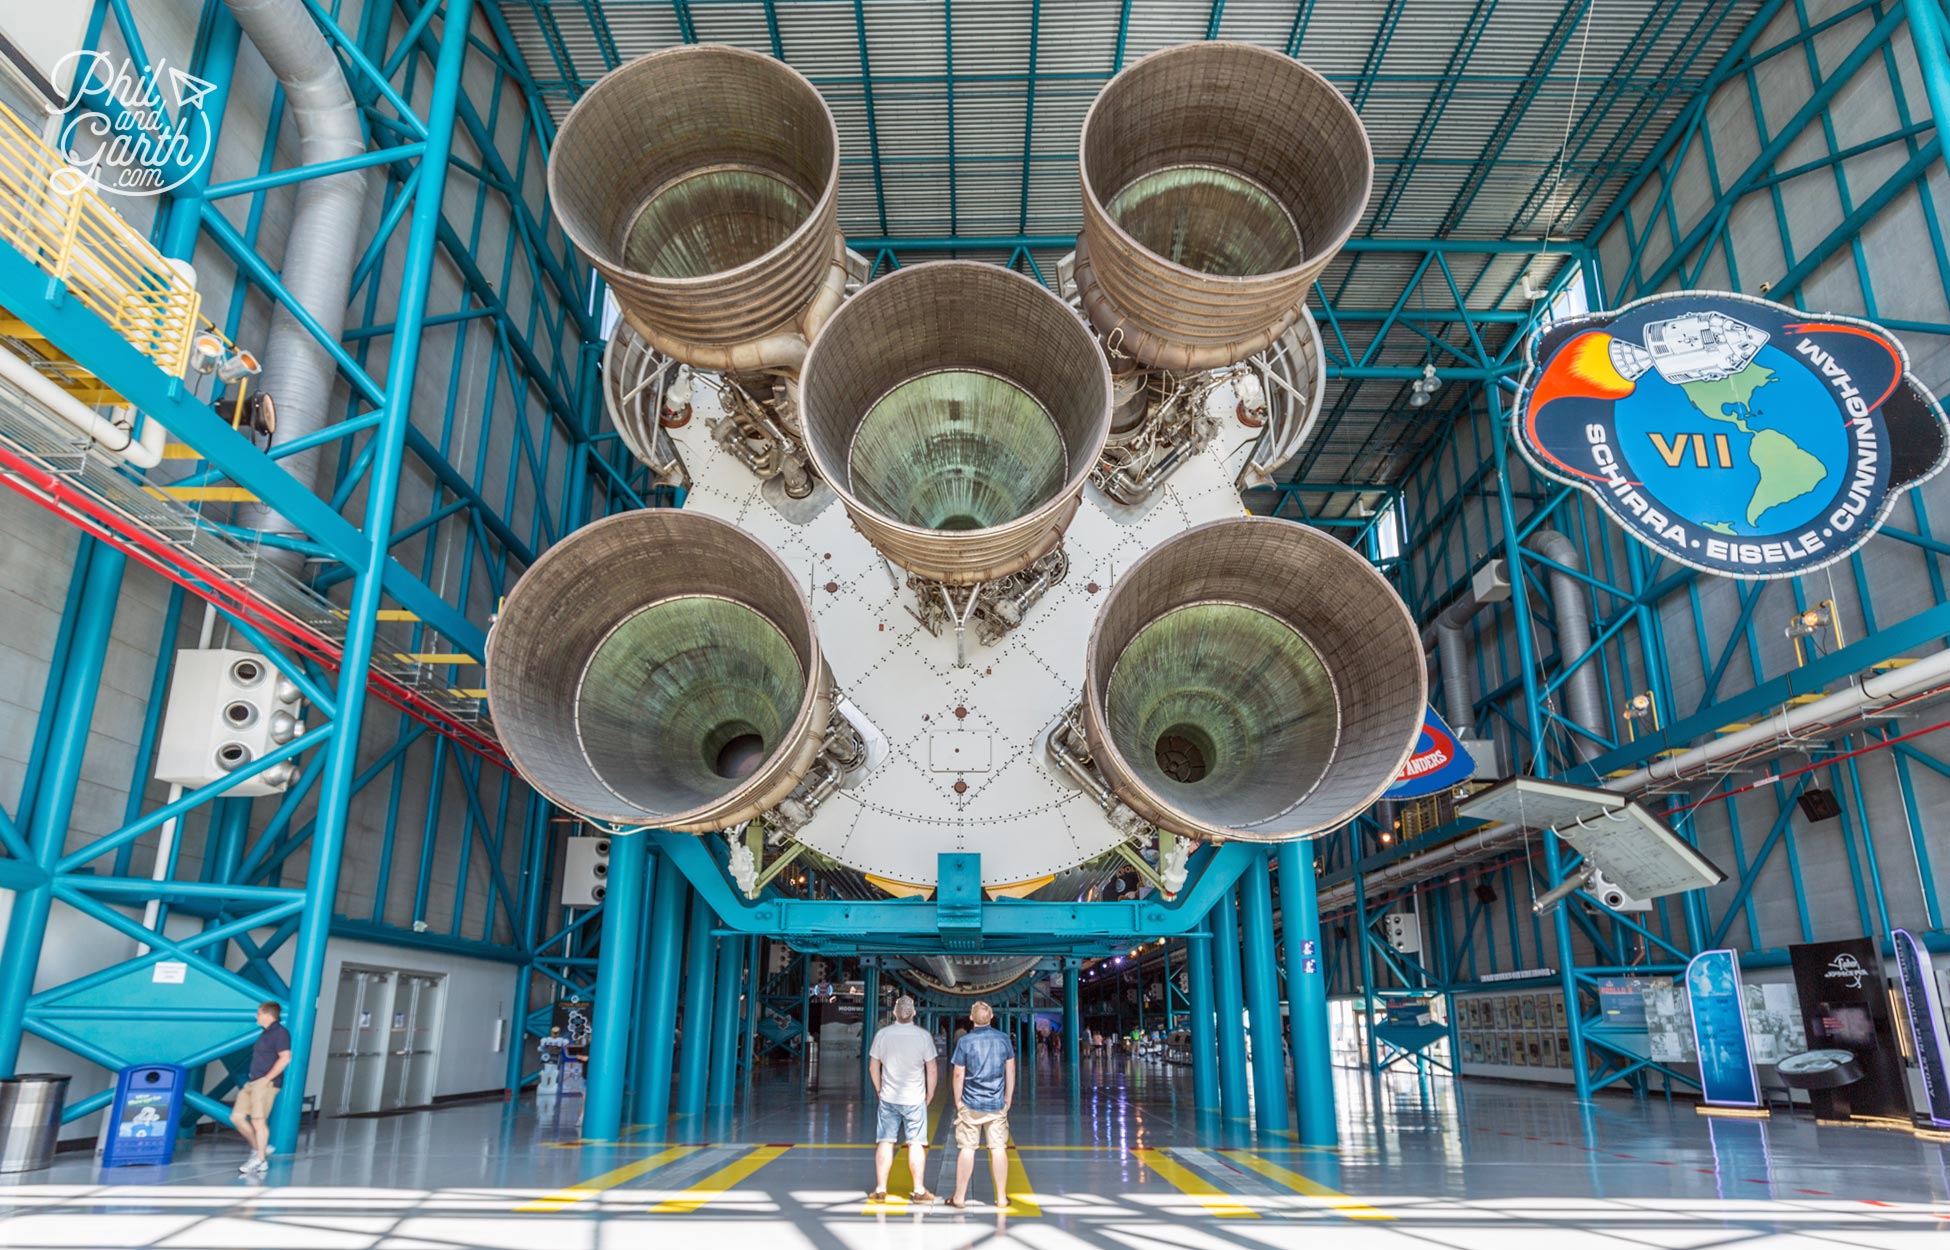 Phil and Garth looking up at the Saturn V Rocket that transferred astronauts to the moon